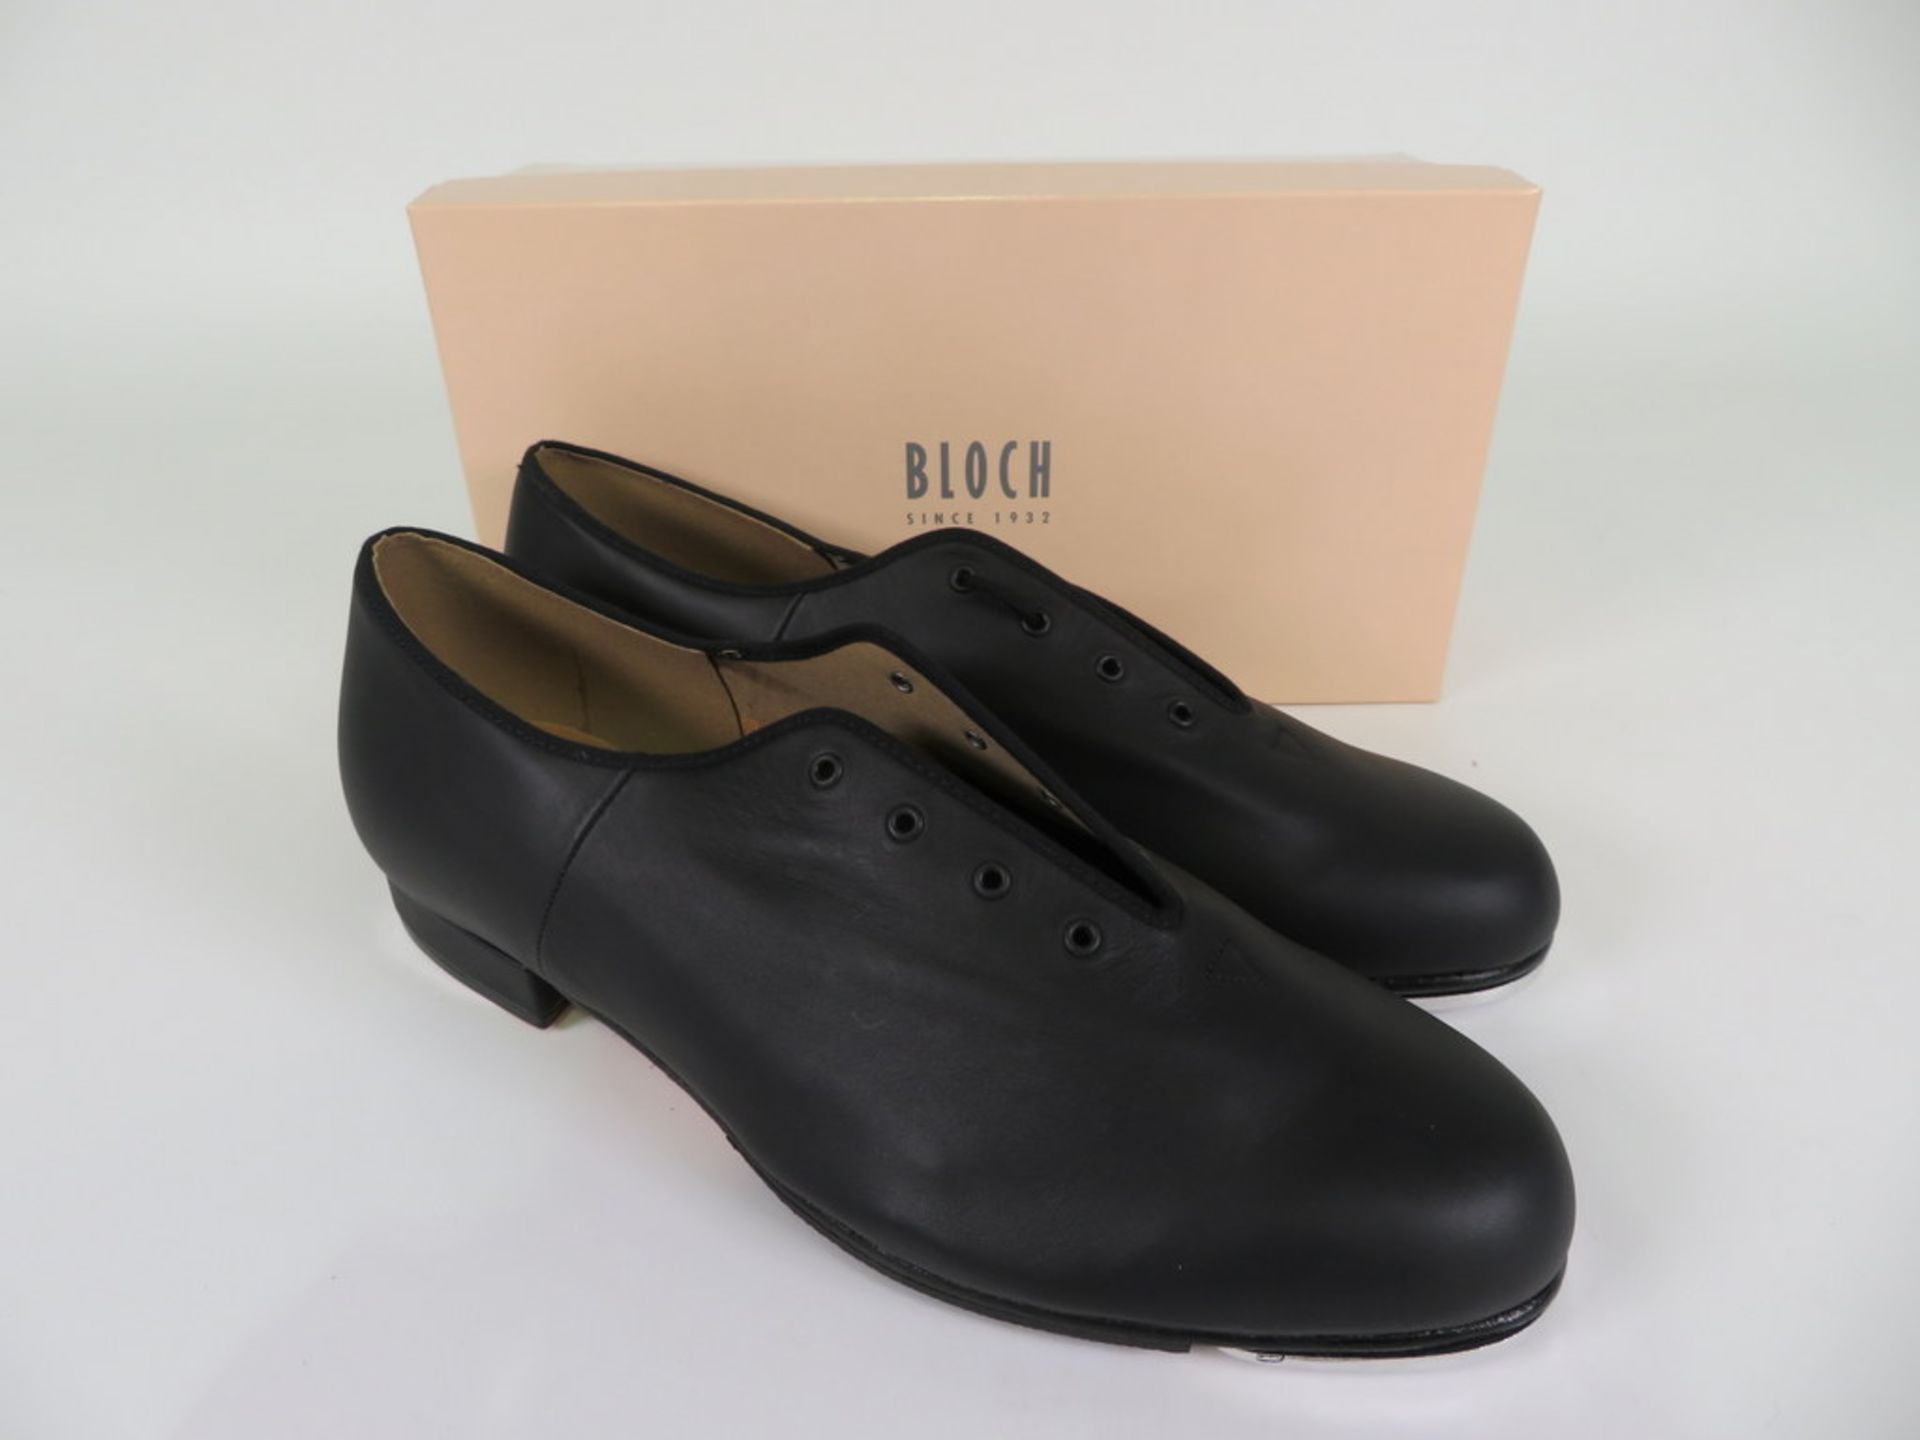 5 X PAIRS OF BLOCH SHOW-TAPPER WOMENS TAP SHOES - Image 2 of 5